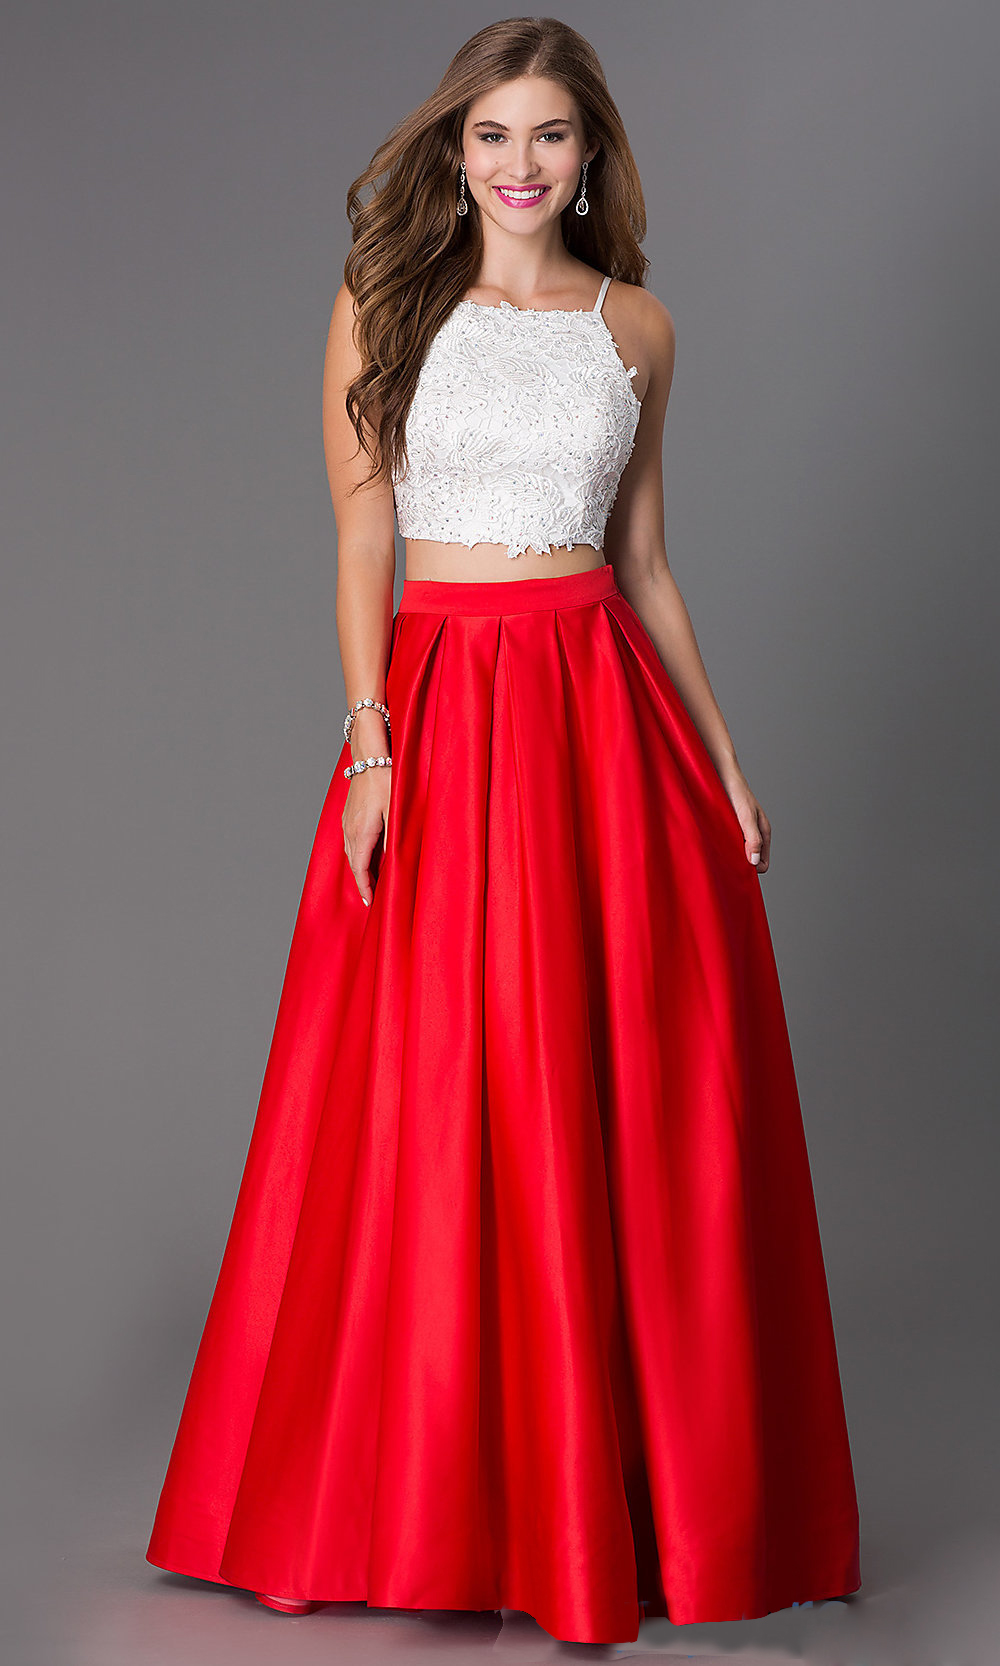 Sexy Red Long 2 Piece Prom Dresses 2016 O Neck Appliques Lace Prom ...